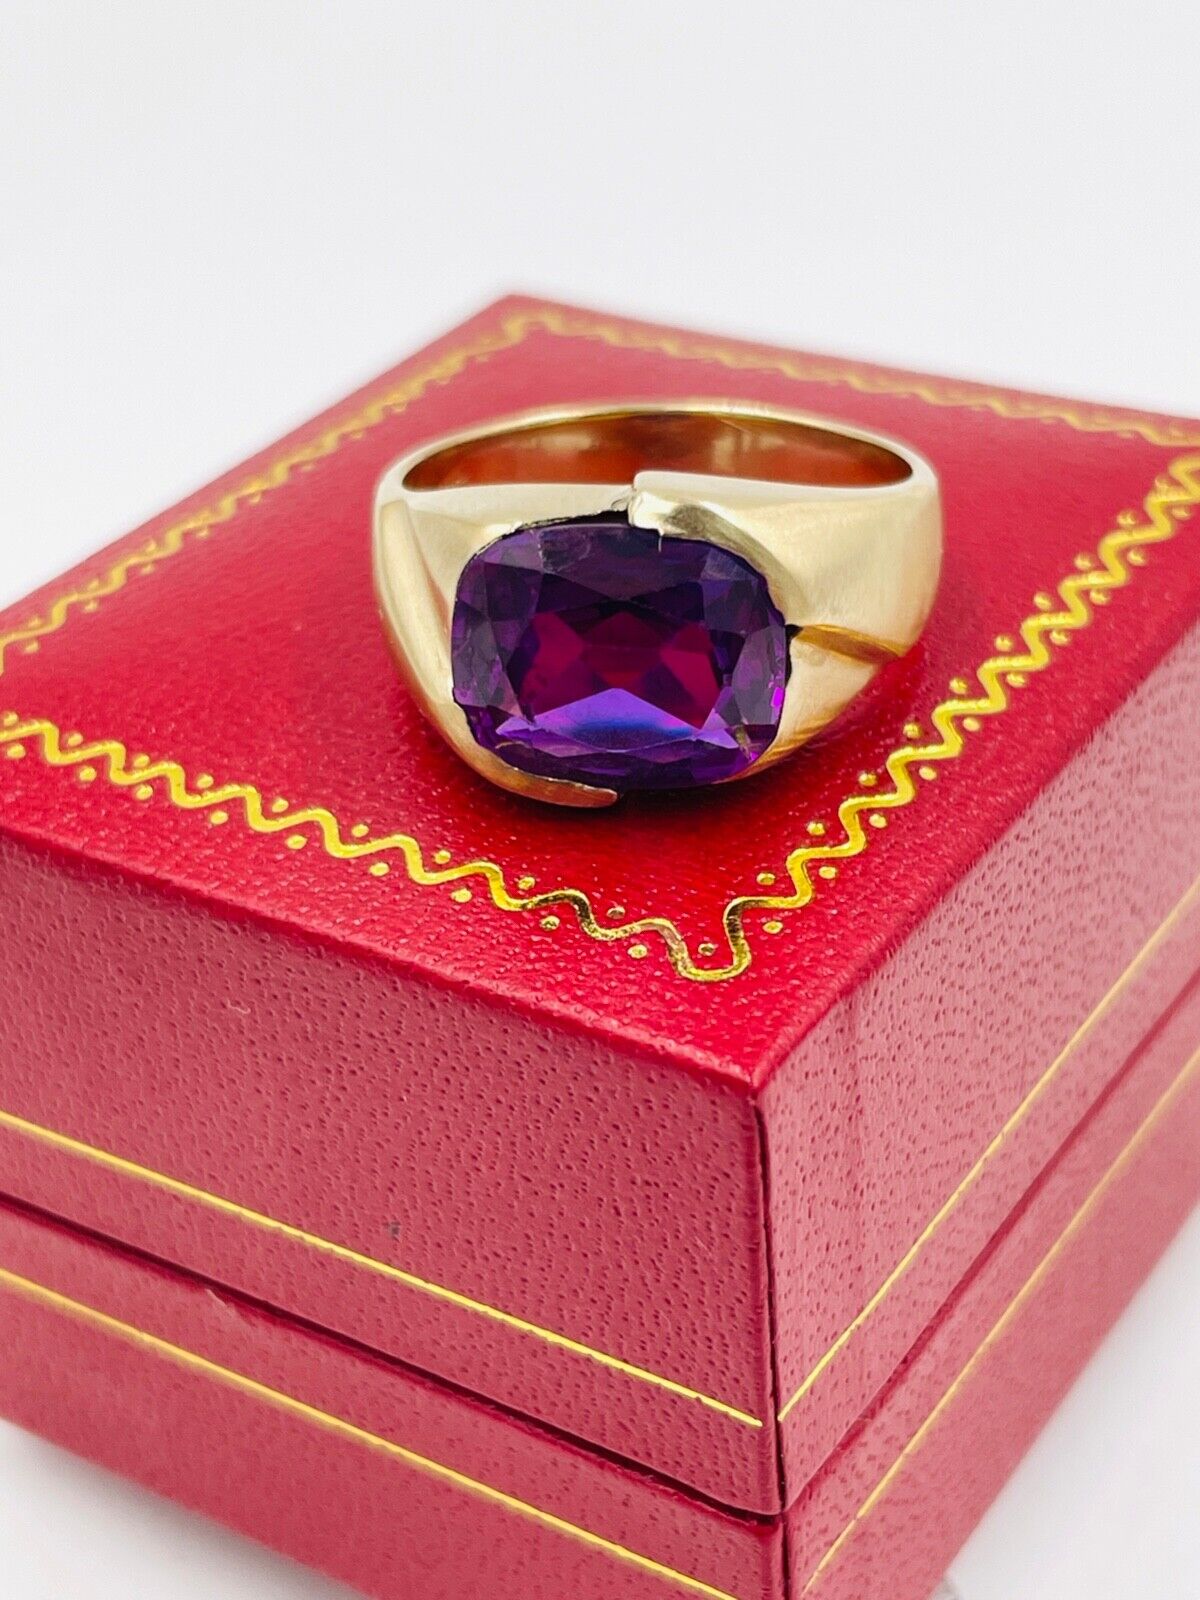 Vintage 14k Yellow Gold Synthetic Alexandrite Men's Ring